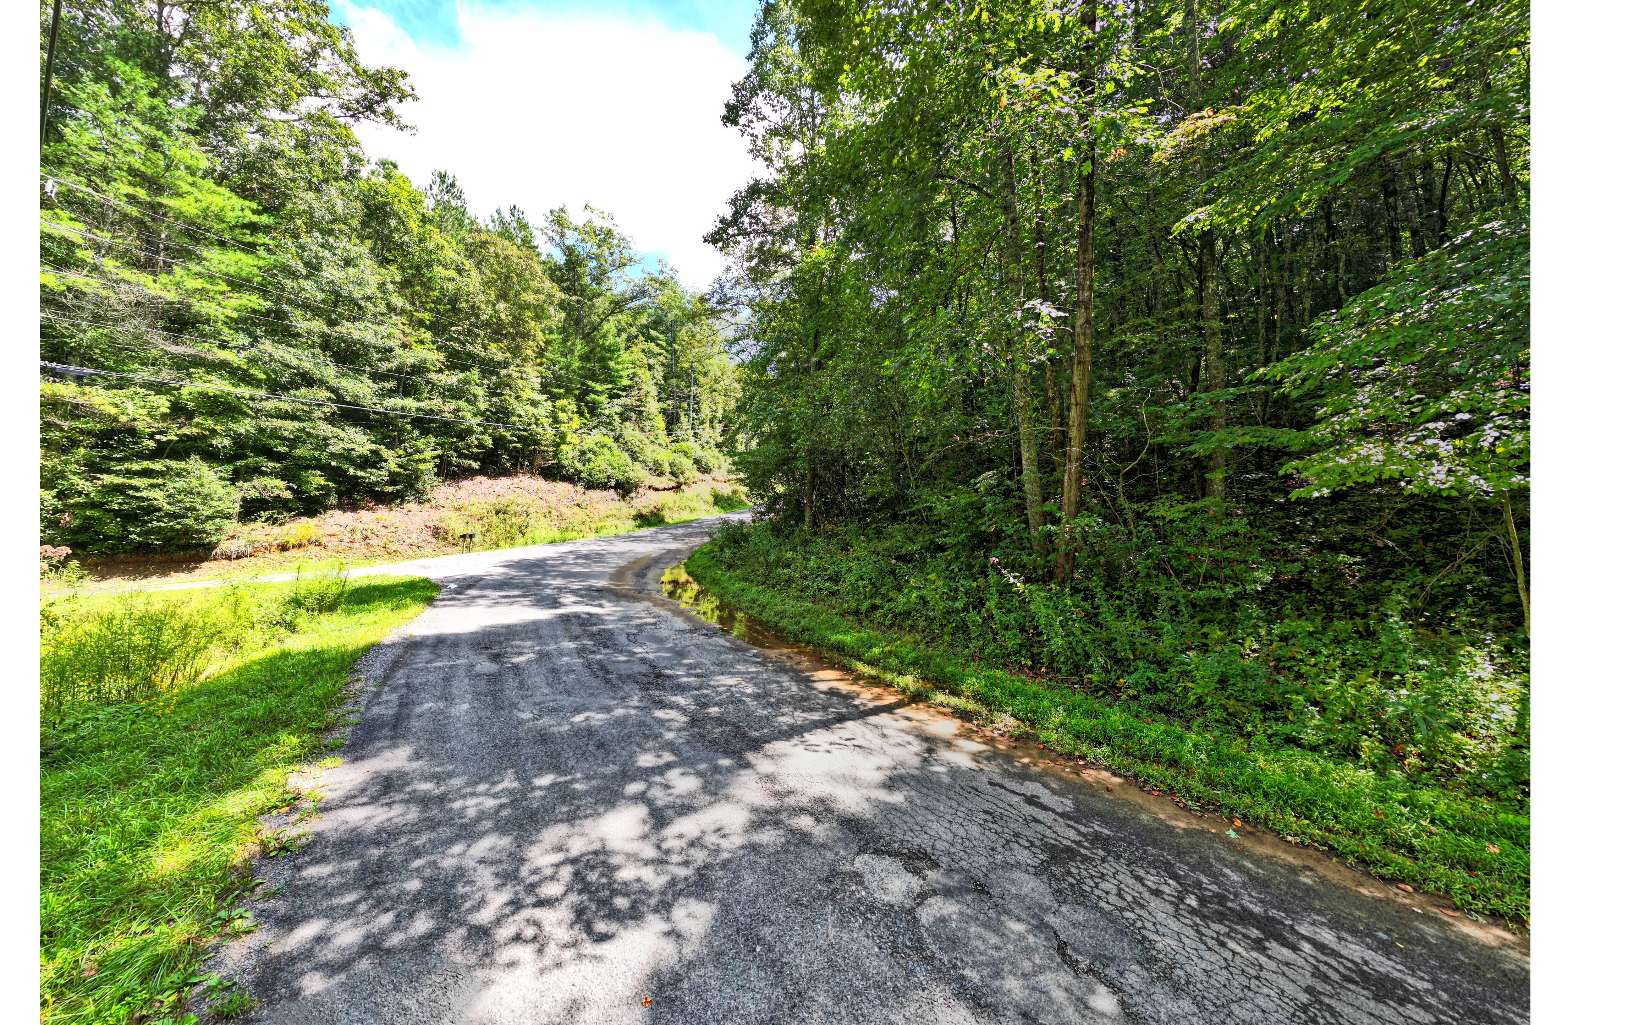 Want to have large acreage but not be totally isolated from getting to town for groceries and day trips? Want to have paved roads leading all the way to your property? This 12 acre parcel in BEAUTIFUL ELLIJAY, GA is only 10 min to town and still feels like it is AWAY FROM IT ALL! Very minimal restrictions in place to protect your investment. NO HOA or FEES. Opportunities abound on this acreage and the location is so CONVENIENT and yet so PRIVATE! Perfect to build your hideaway retreat. Property has already been perked for septic. The WILDLIFE LOVES IT HERE and YOU WILL TOO! It's time to leave the busy of the world behind and escape to your mountain retreat on Pleasant Gap Rd. Convenient to Carters Lake for your lake adventures and numerous hiking trails nearby to explore. Your Ellijay mountain retreat is waiting for you to build it on this beautiful wooded 12 acres on Pleasant Gap Rd. Come see and explore it today! Portion of Gilmer County Parcel 3035 002A